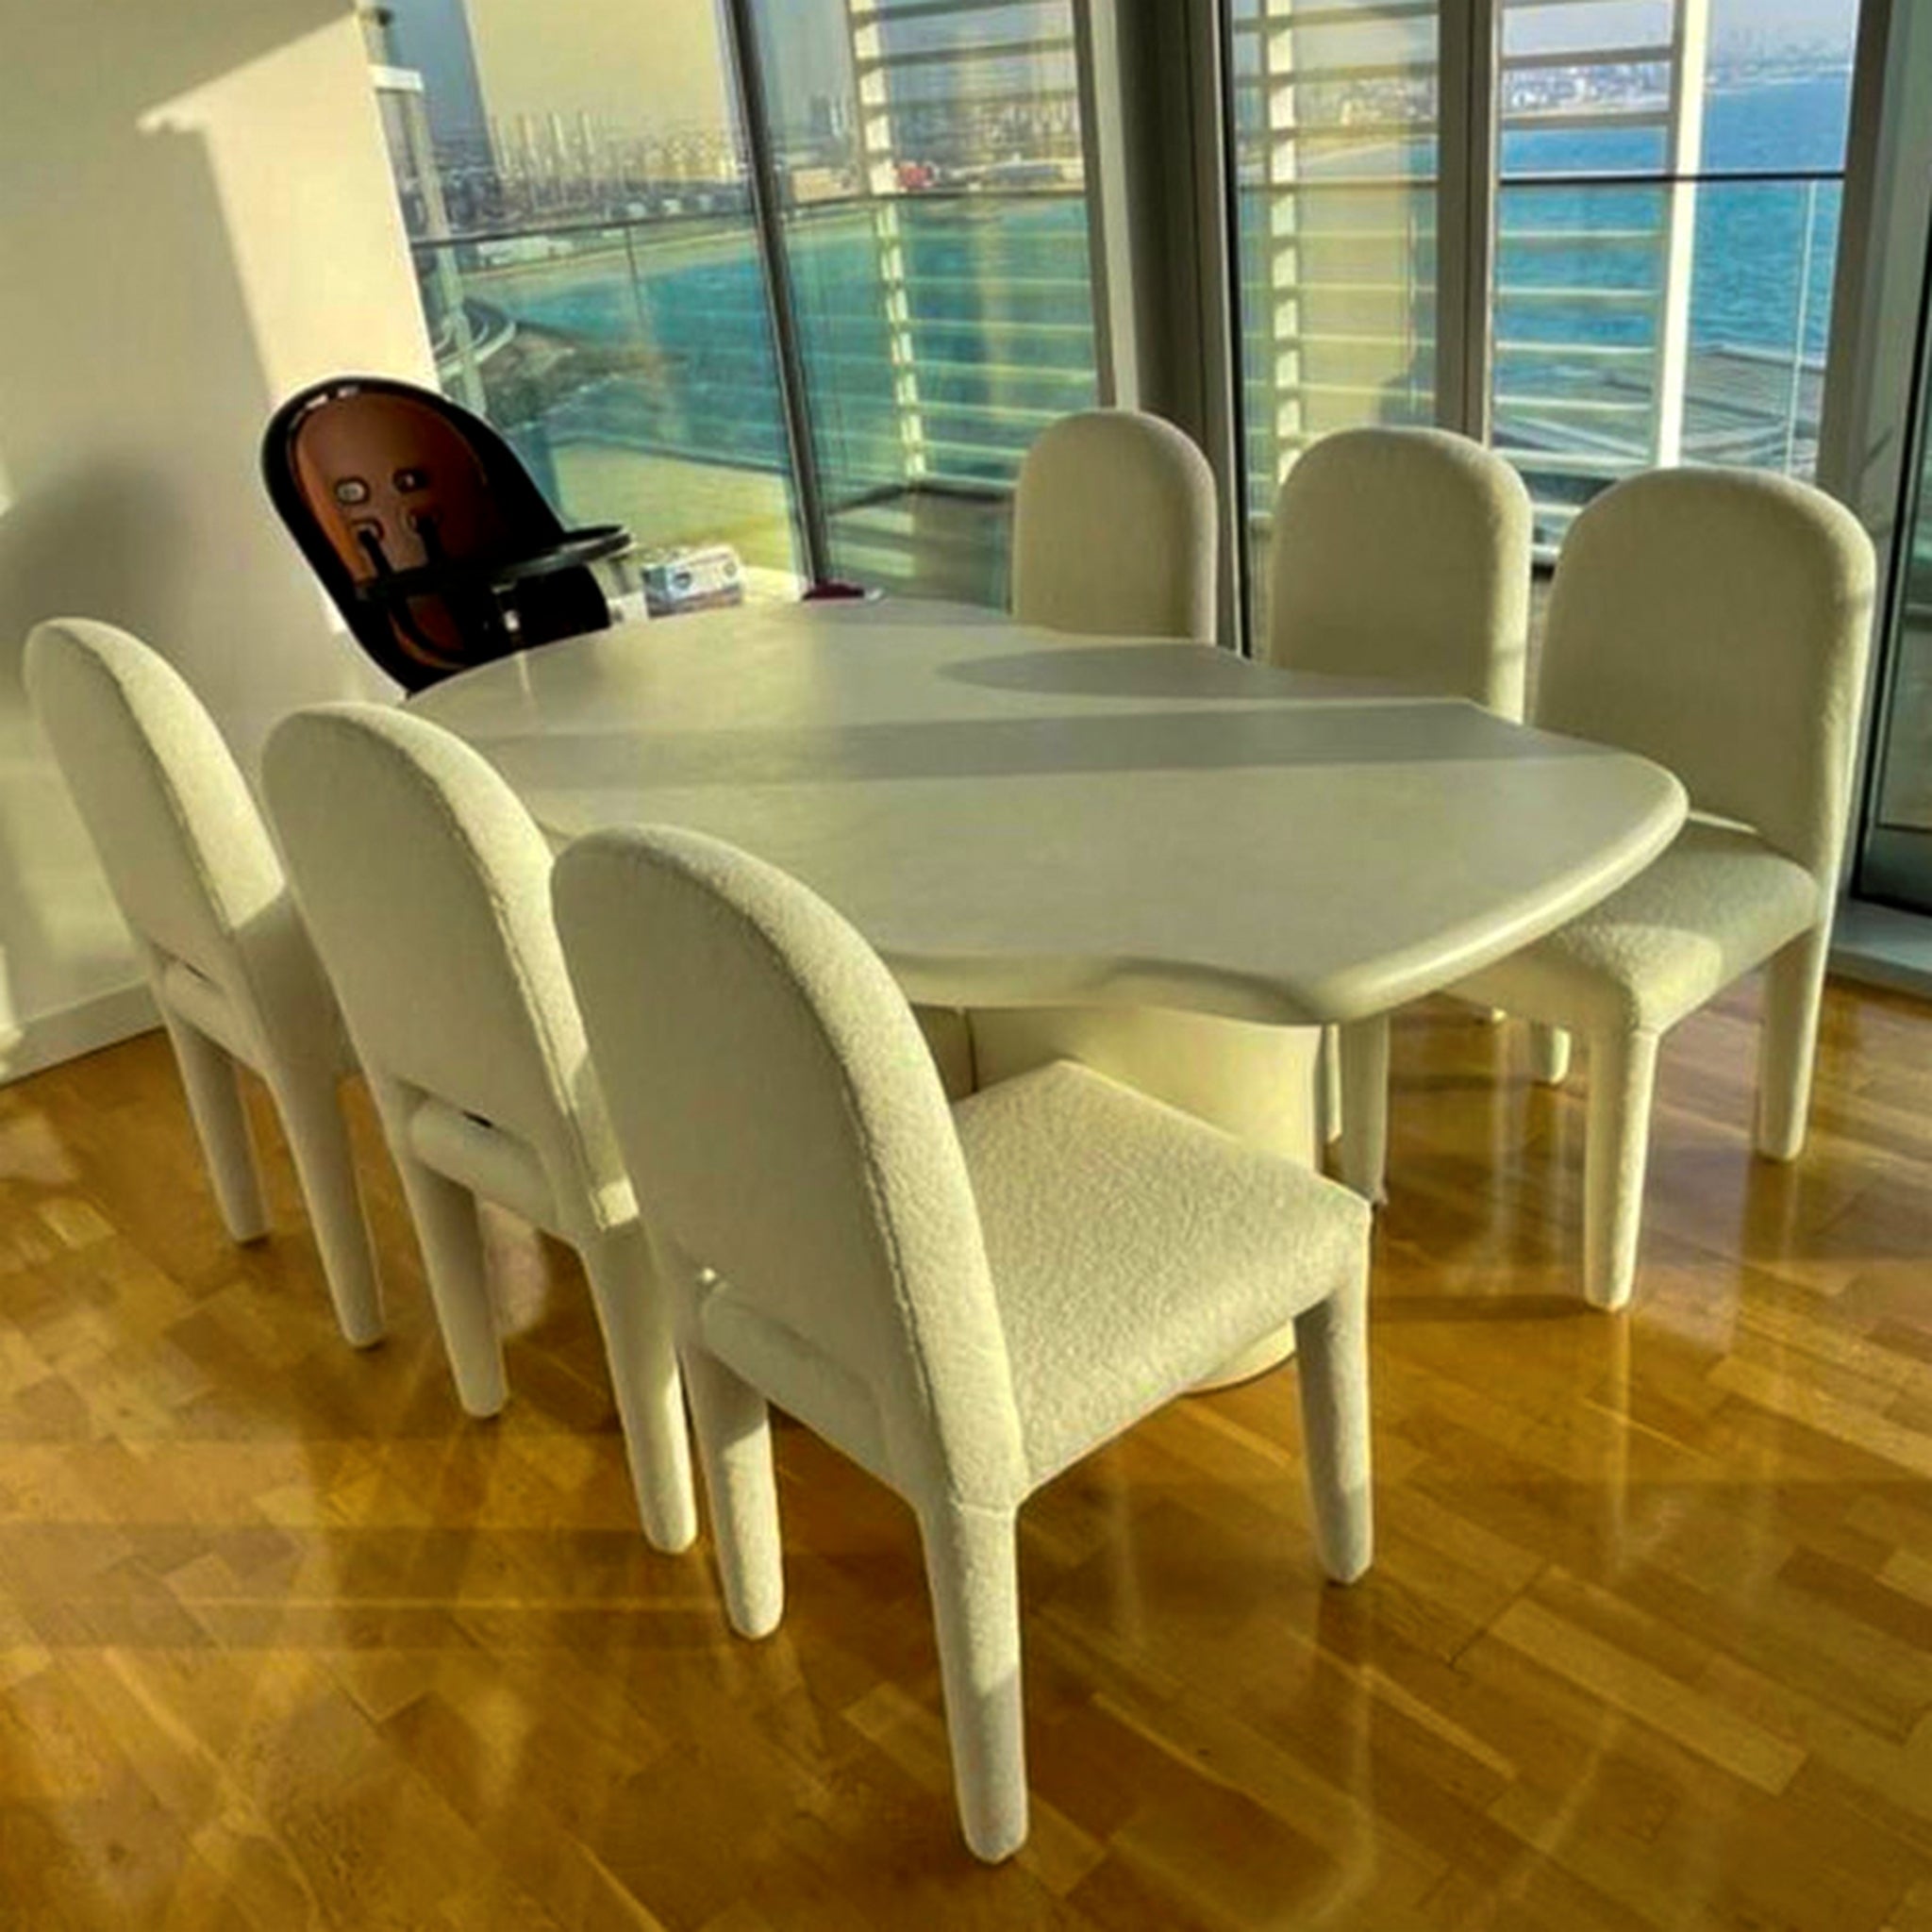 The Shelly Chair set - a modern dining table surrounded by six upholstered dining chairs with curved backs and elegant thin legs, set in a room with a view of the sea.